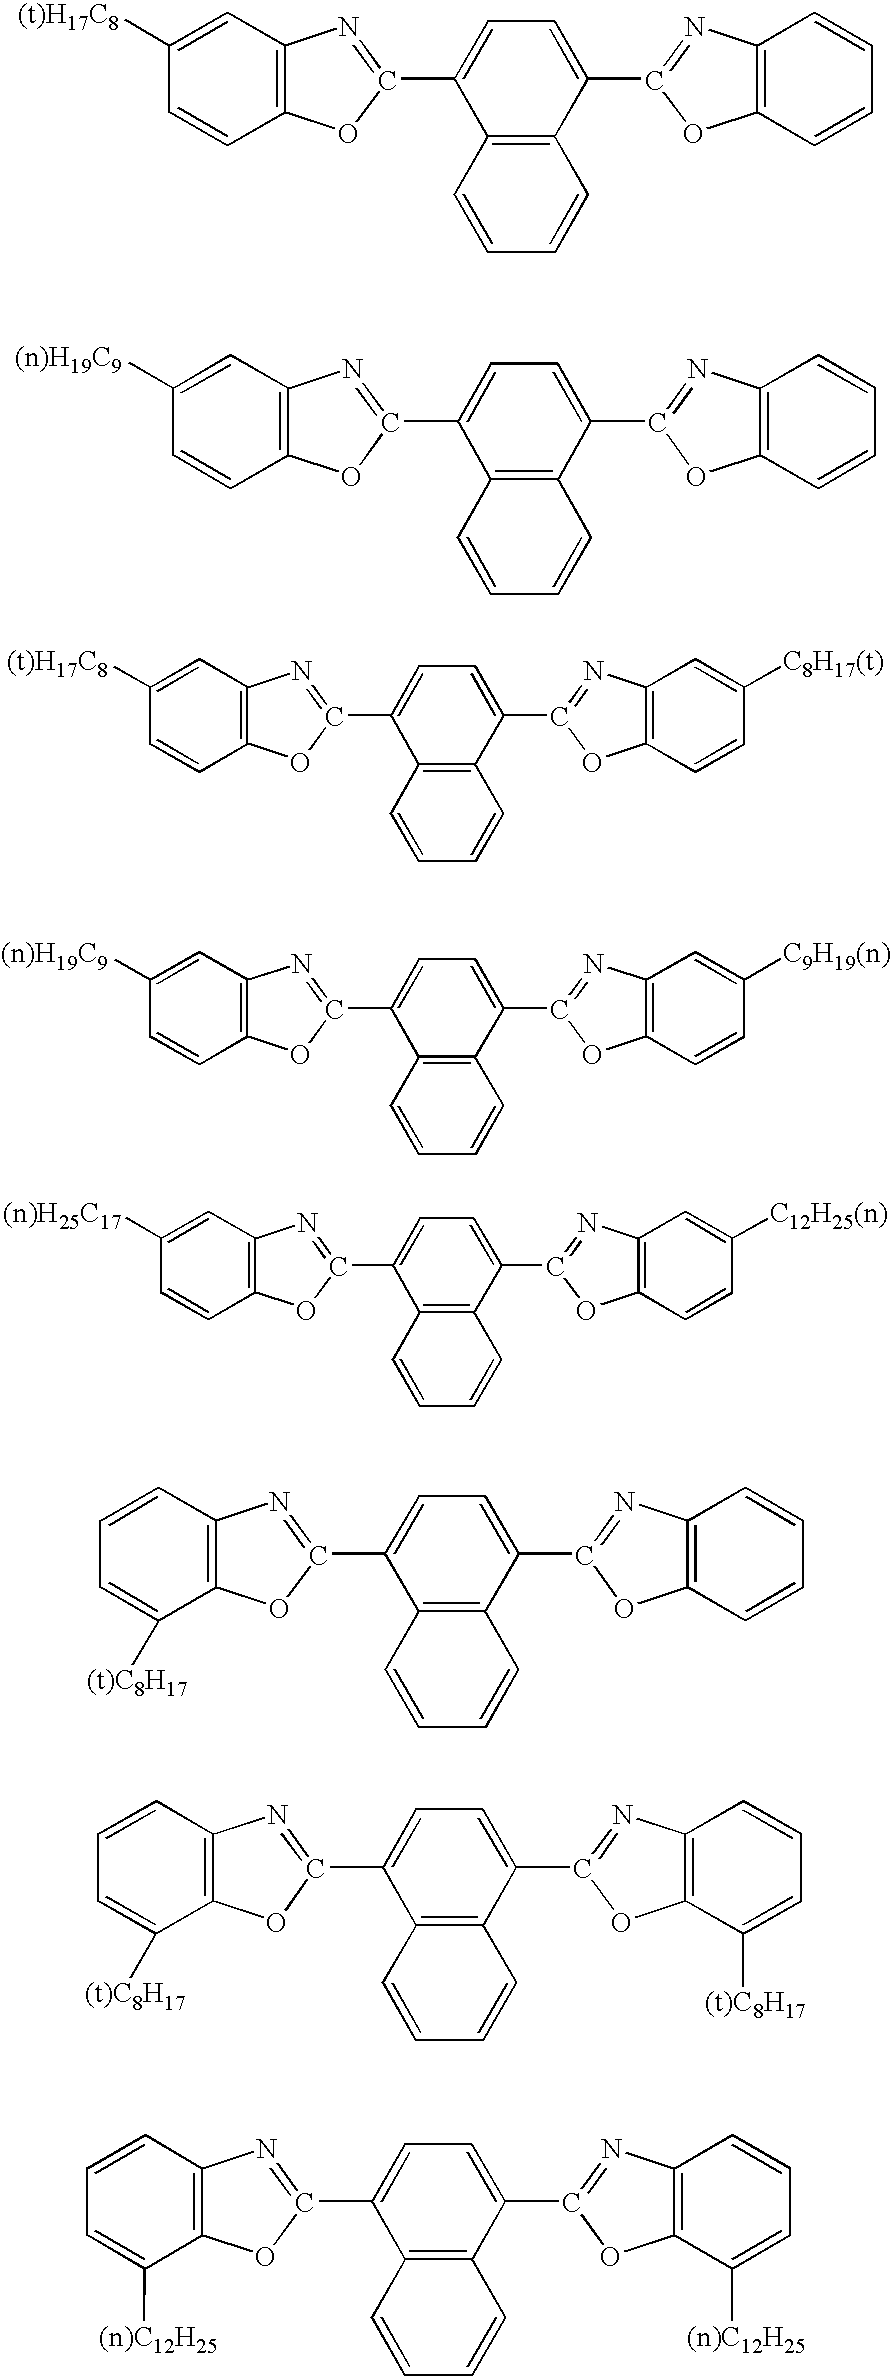 Light reflecting polymeric articles containing benzoxazolyl-napthalene optical brighteners